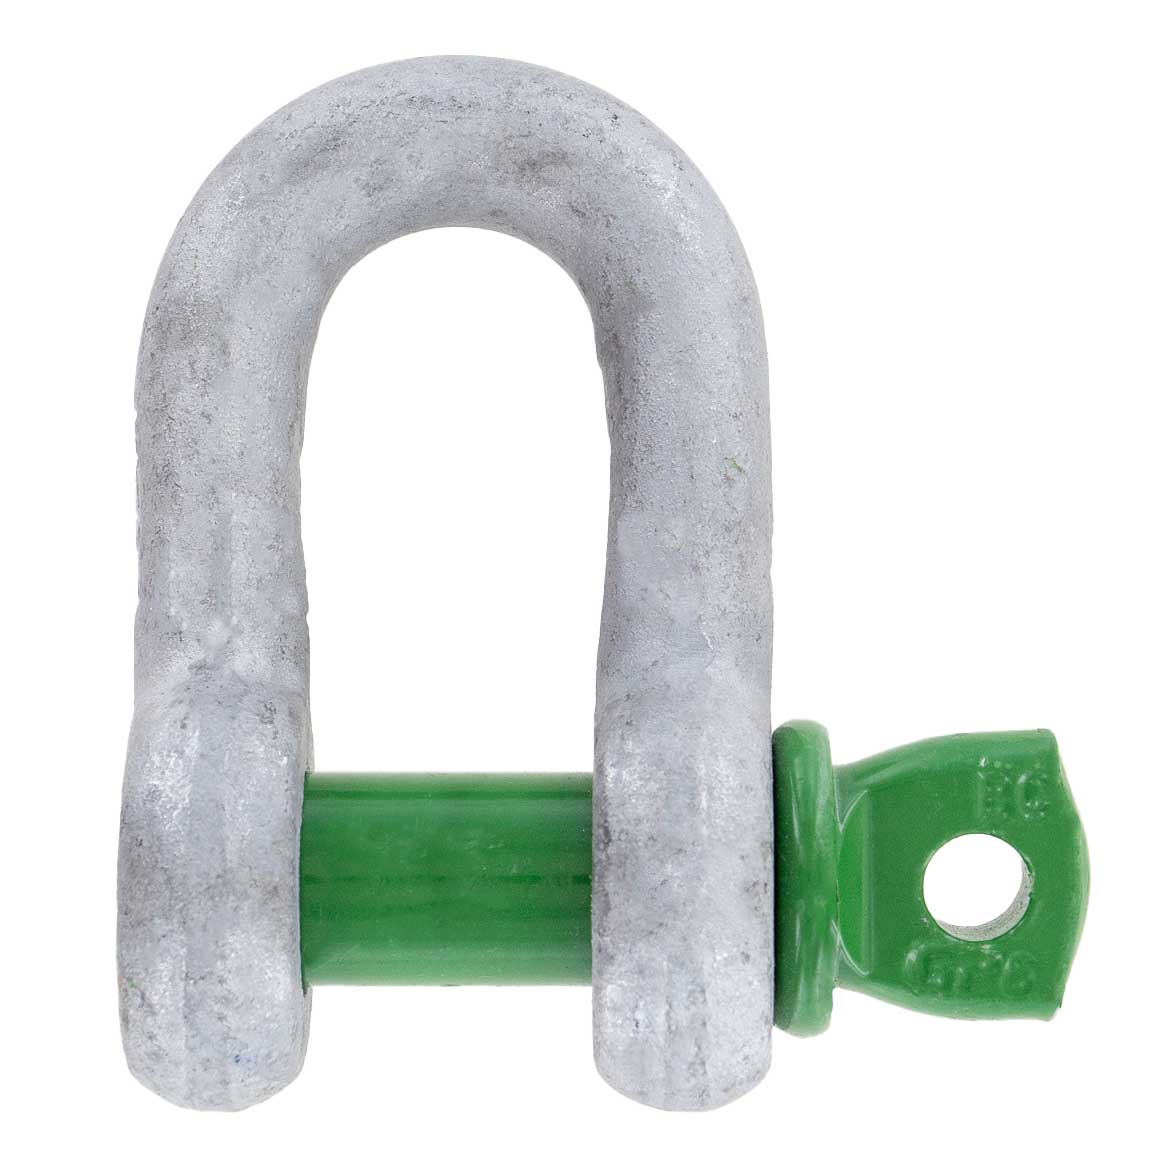 2" Van Beest Green Pin® Screw Pin Chain Shackle | G-4151 - 35 Ton primary image